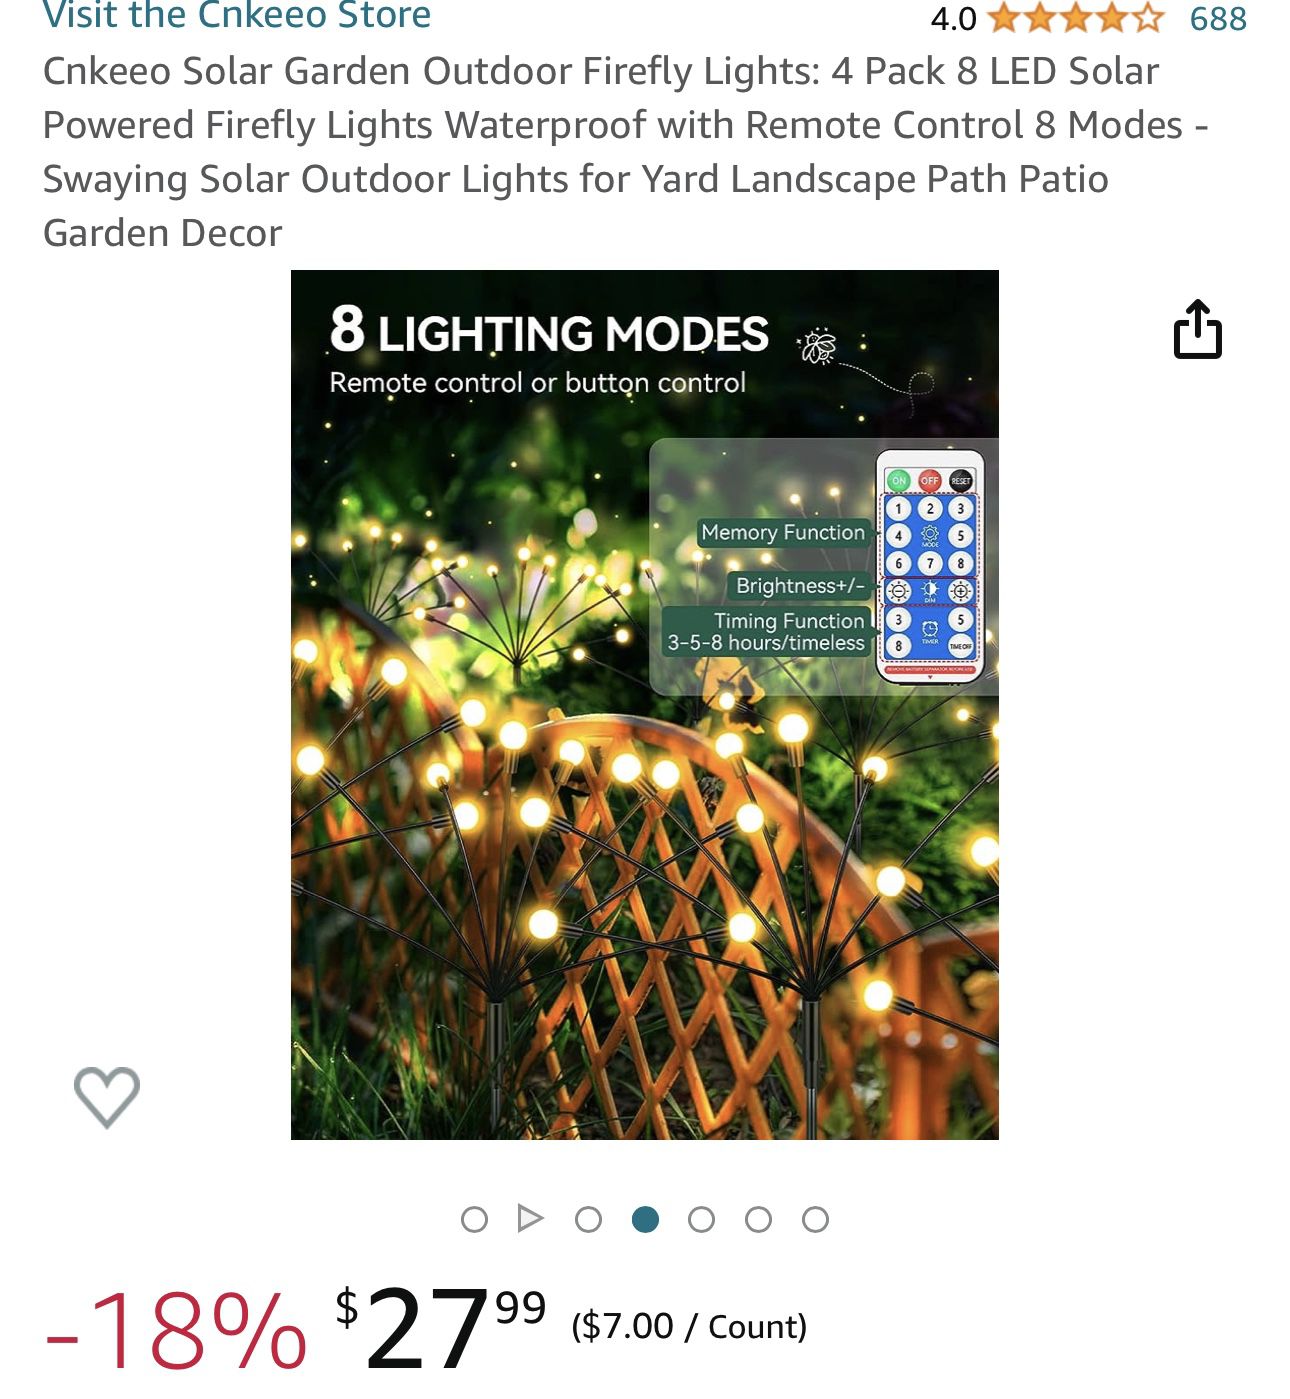 Cnkeeo Solar Garden Outdoor Firefly Lights: Pack LED Solar Powered  Firefly Lights Waterproof with Remote Control Modes Swaying Solar  Outdoor L for Sale in Newport Beach, CA OfferUp